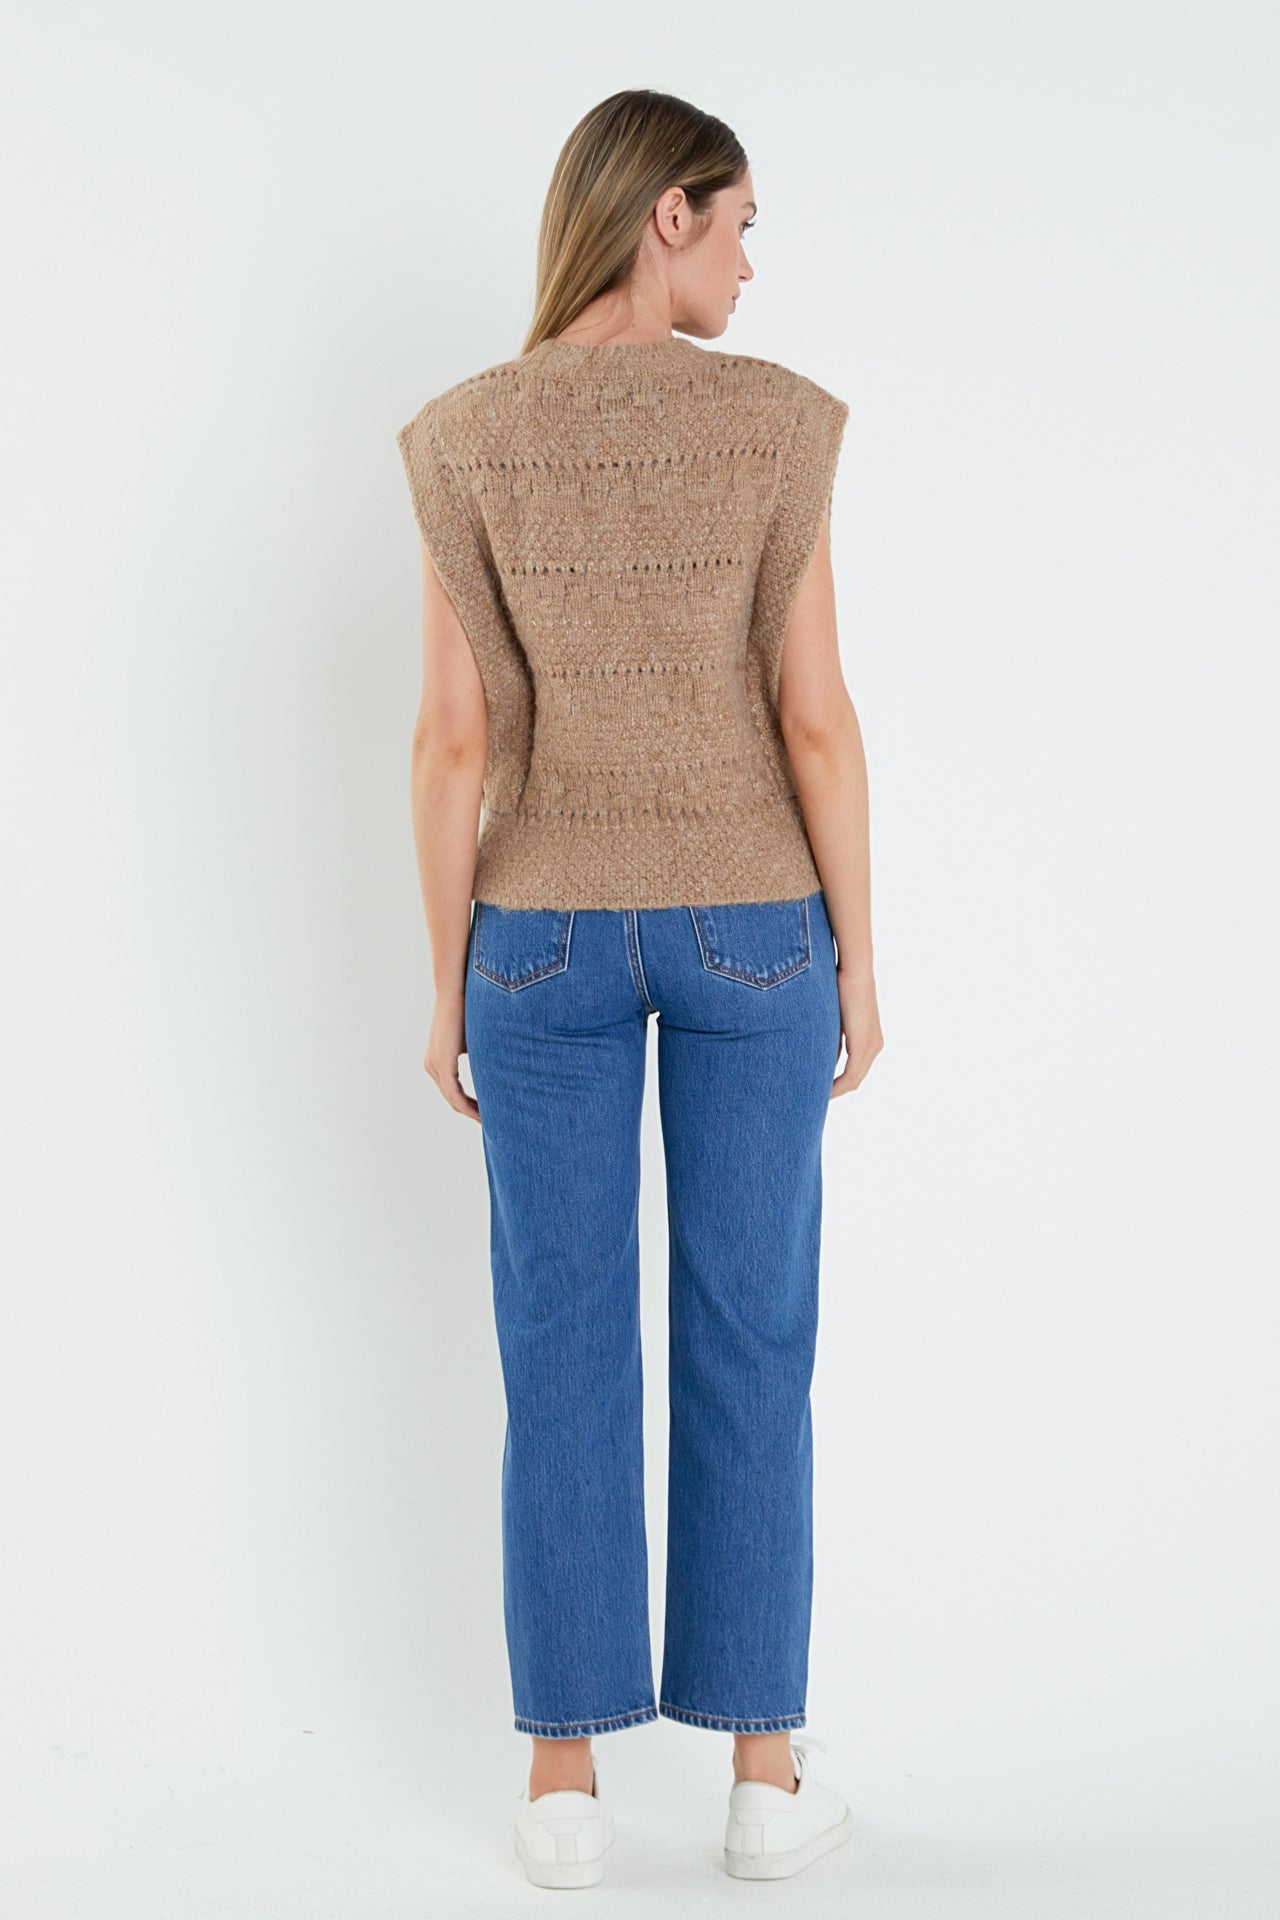 ENGLISH FACTORY - Chunky Textured Knit Vest - SWEATERS & KNITS available at Objectrare